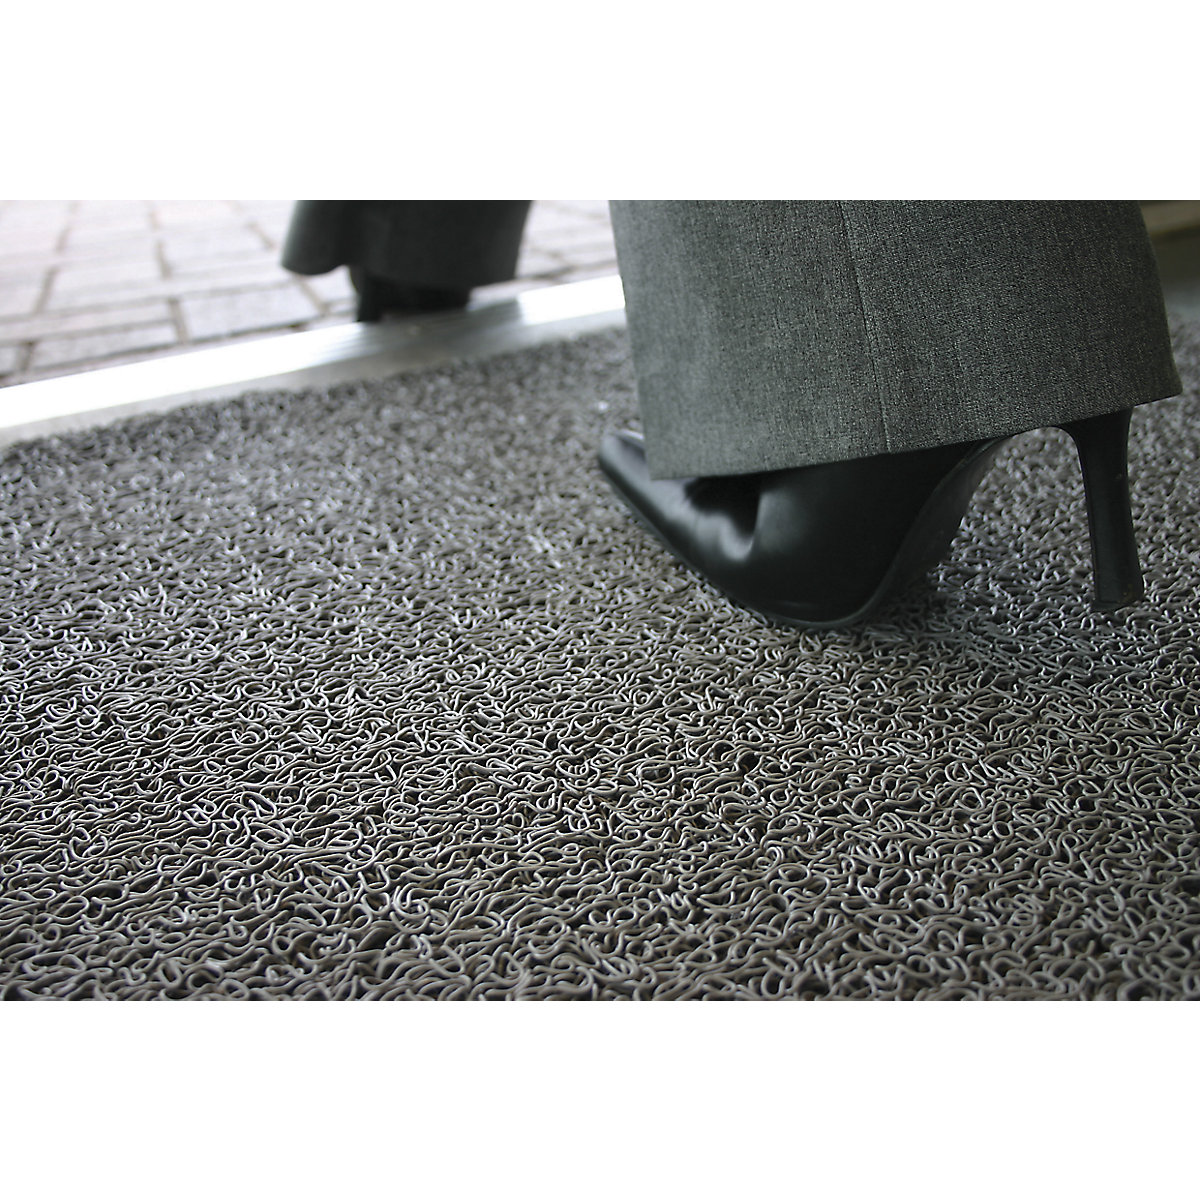 Entrance matting, flame resistant, LxW 1200 x 900 mm, grey